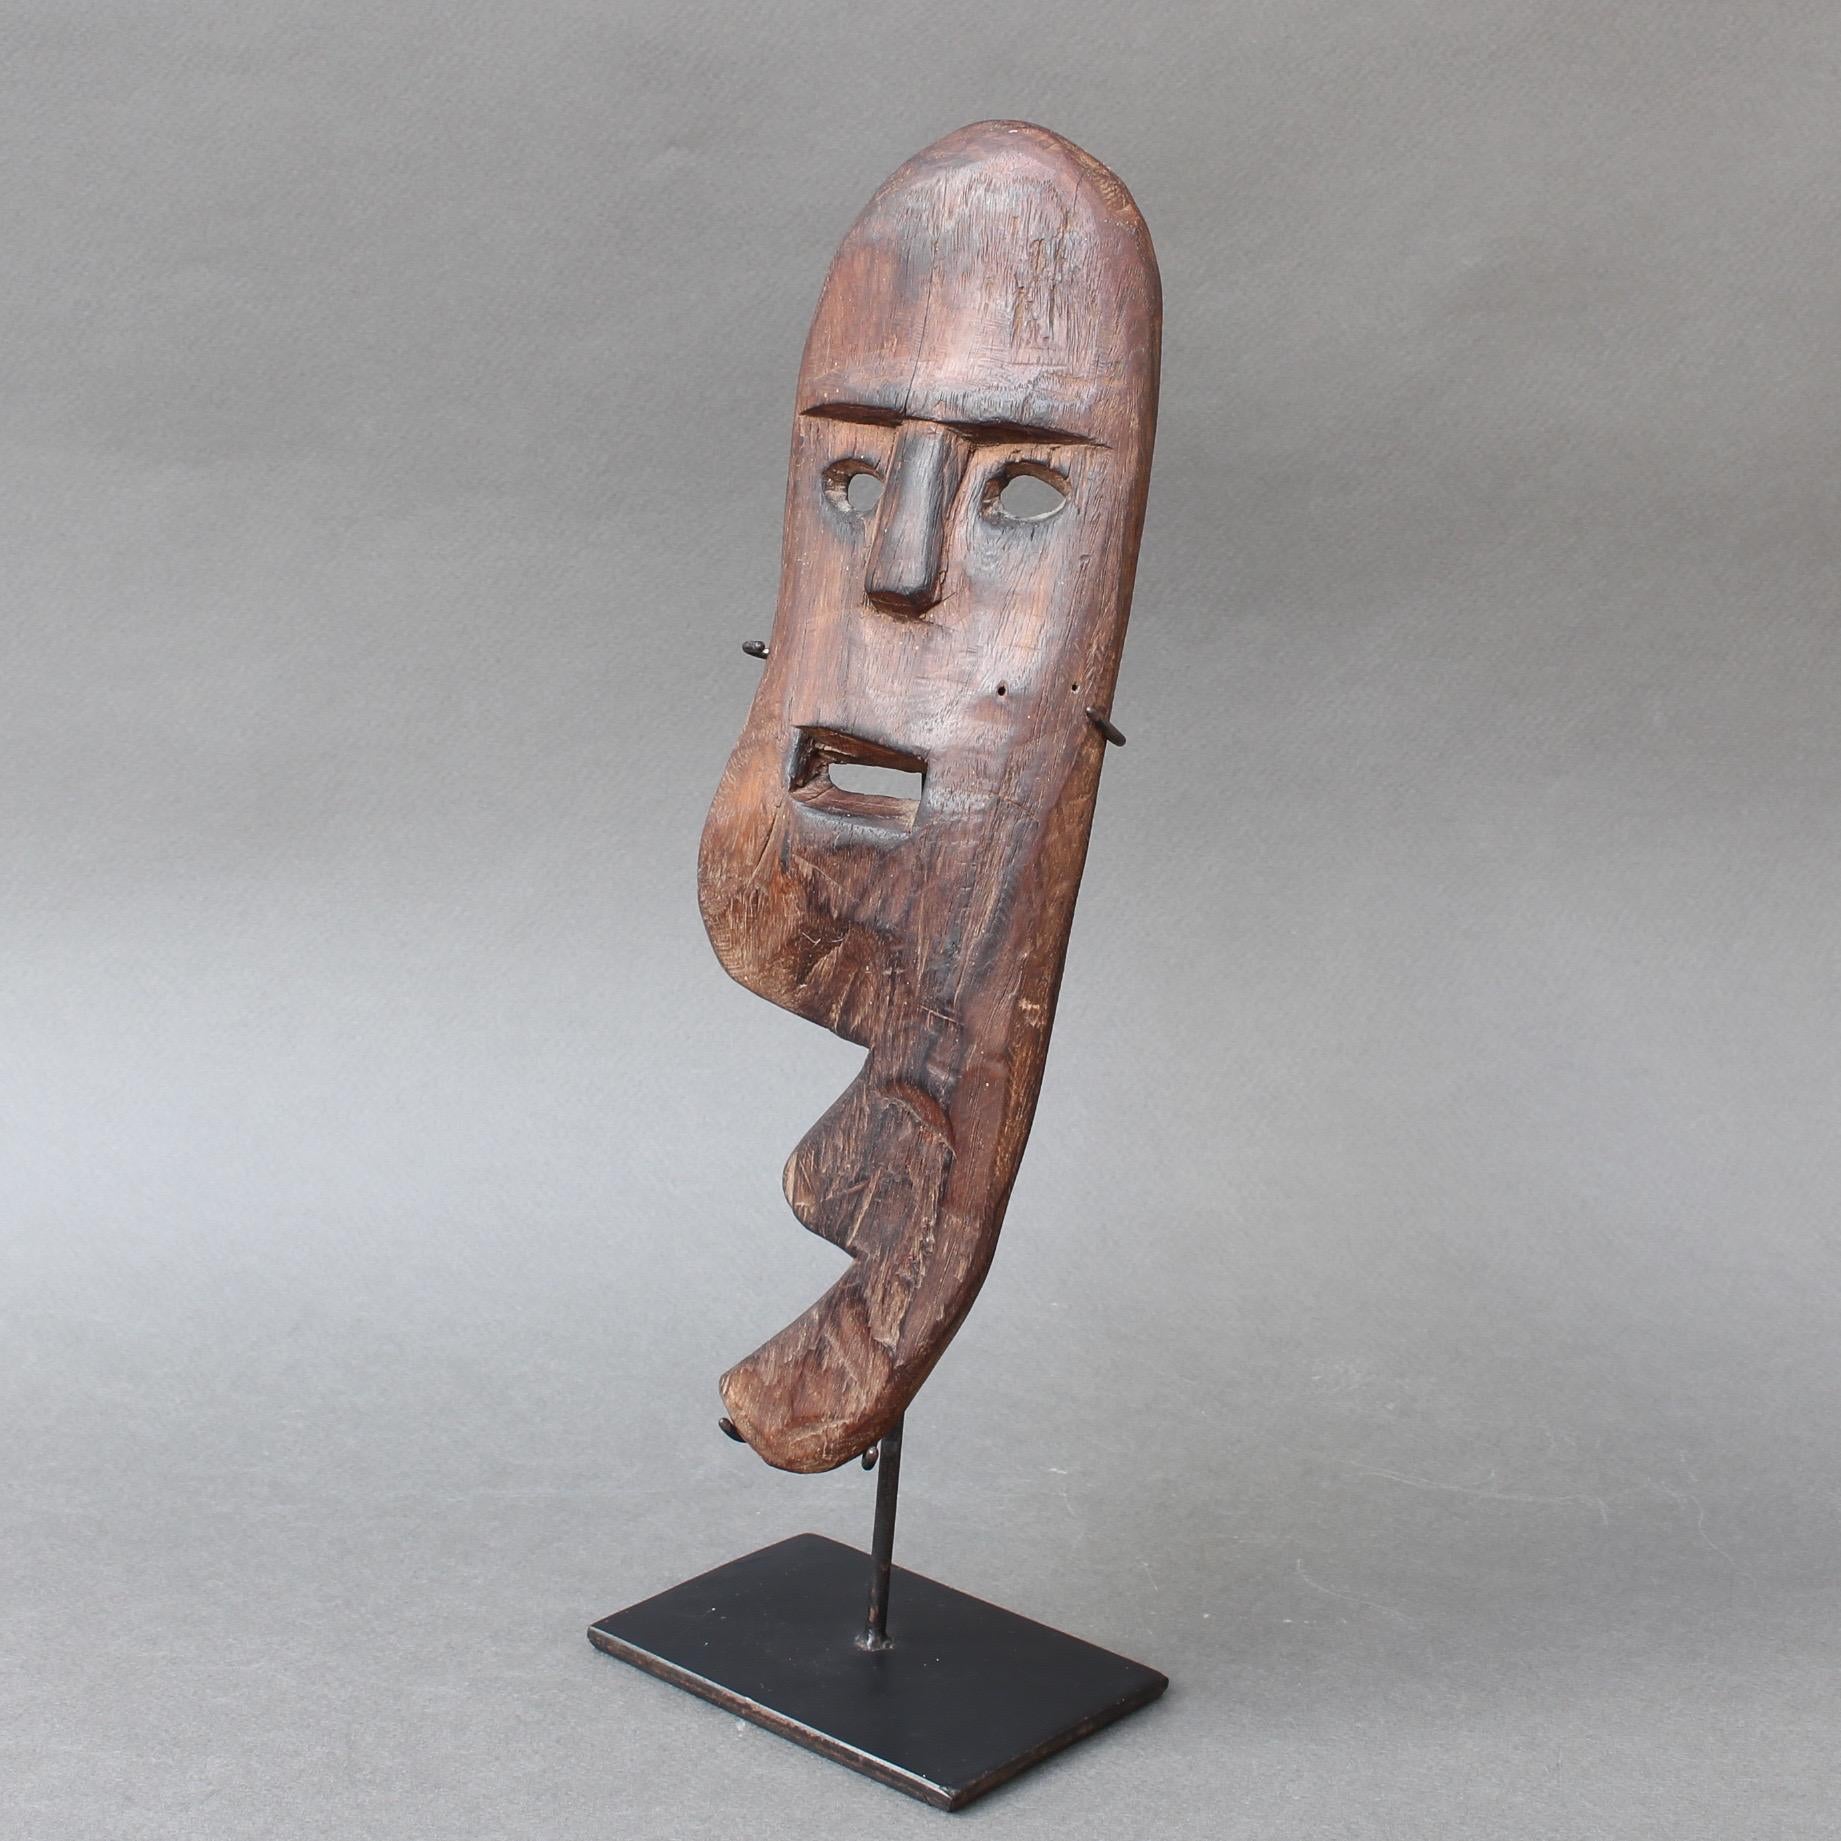 Indonesian Sculpted Wooden Traditional Mask from Timor, Indonesia, circa 1960s-1970s